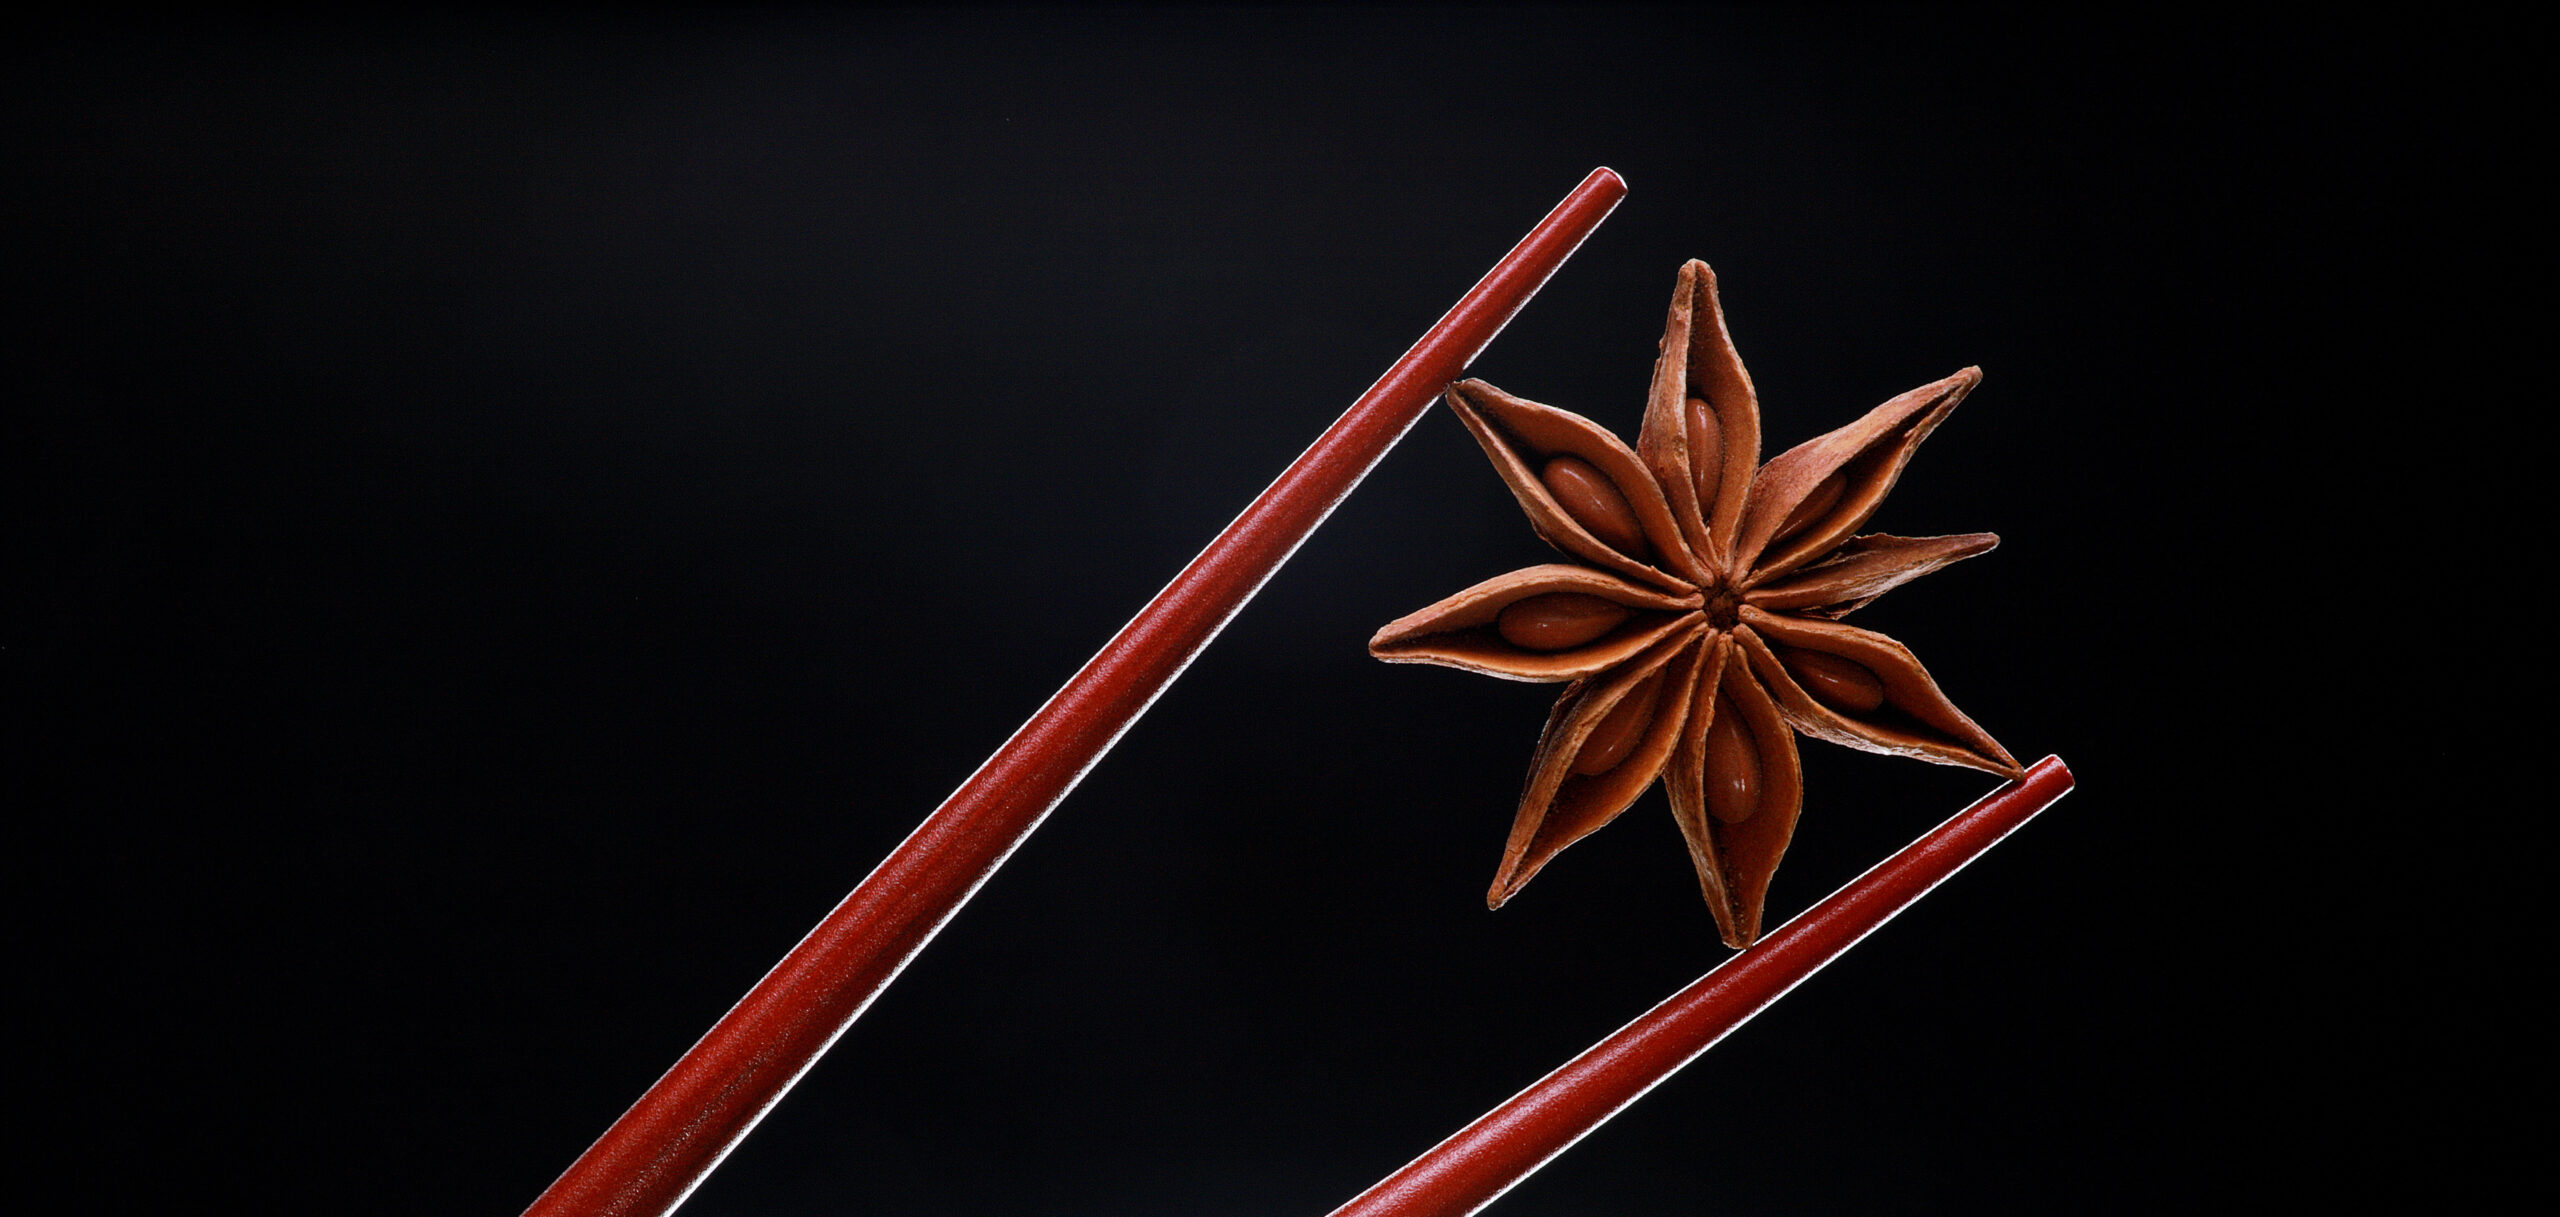 Star Anise: The Celestial Spice with a Galaxy of Benefits